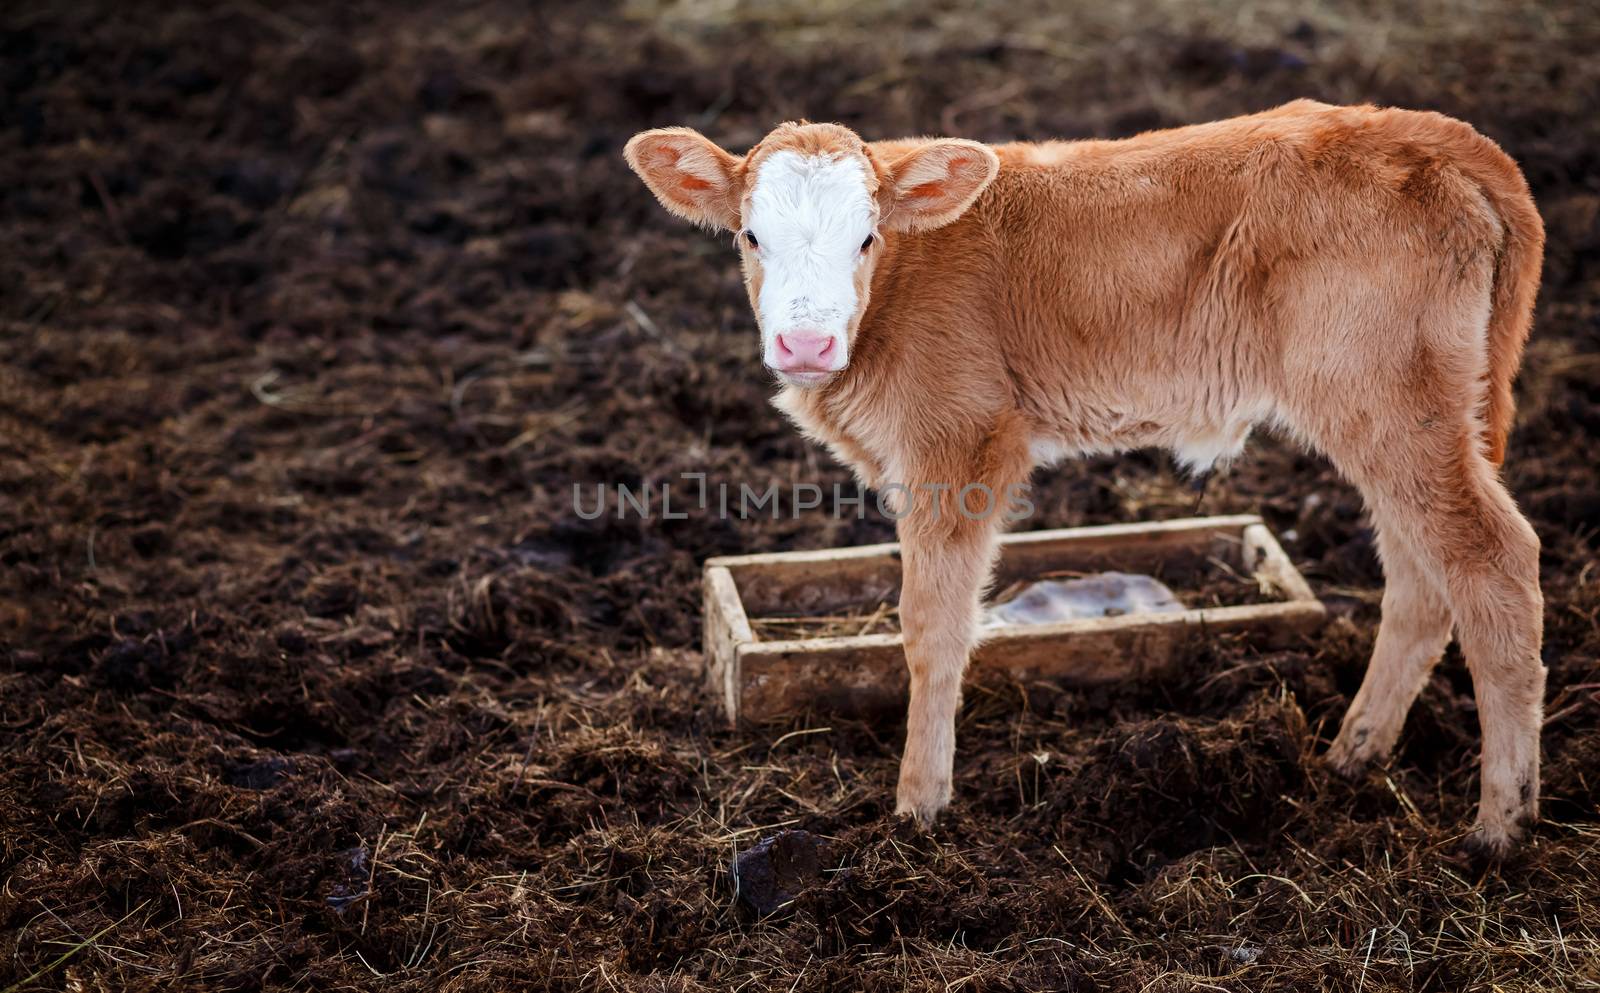 Brown calf in the middle of the feedlot manure, next to the tub for water copy space for your text.